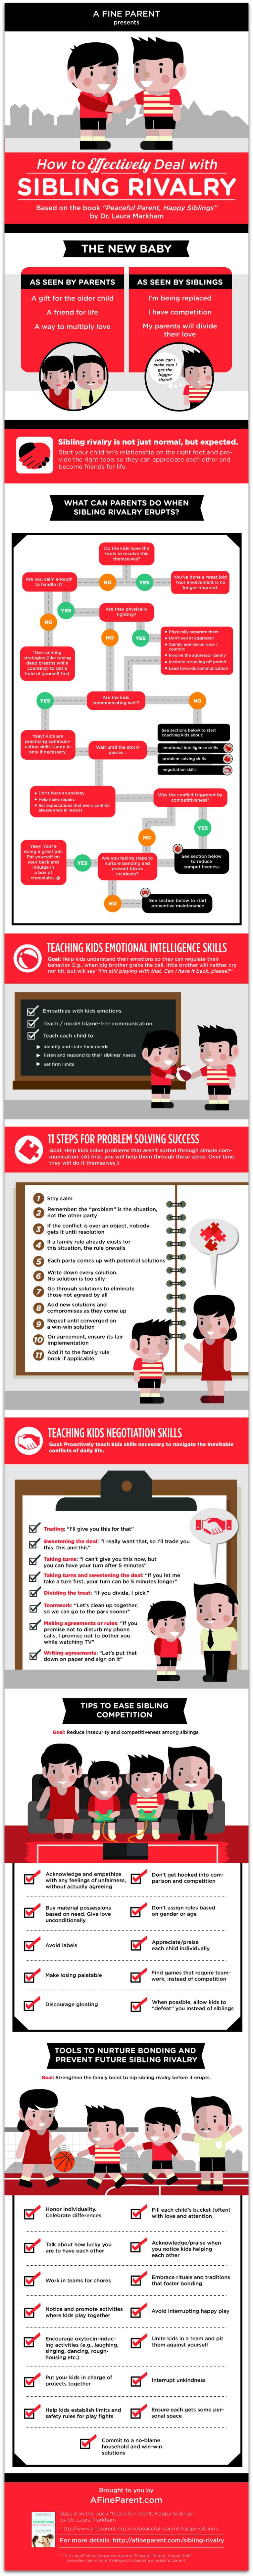 How to Deal With Sibling Rivalry Effectively Infographic